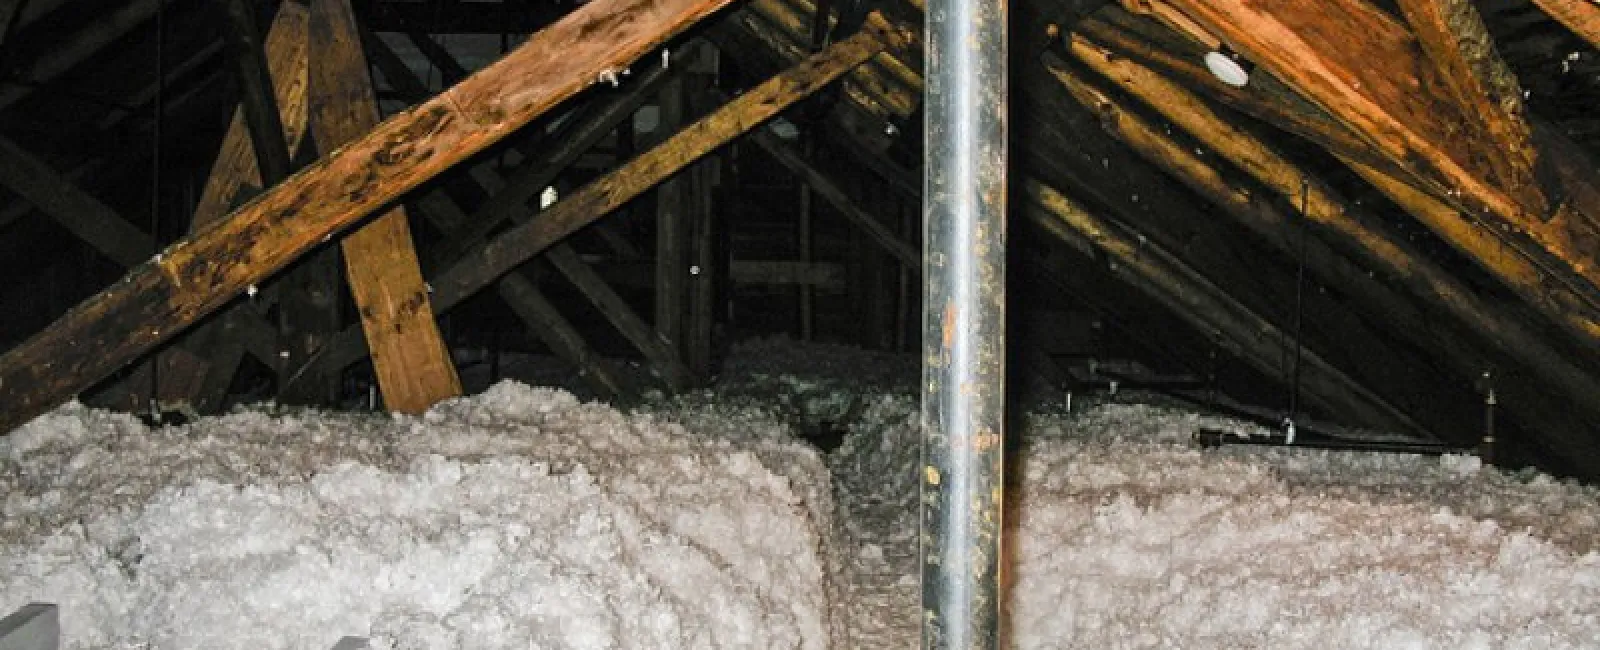 Attic Insulation Not up to Snuff? Here’s How to Tell